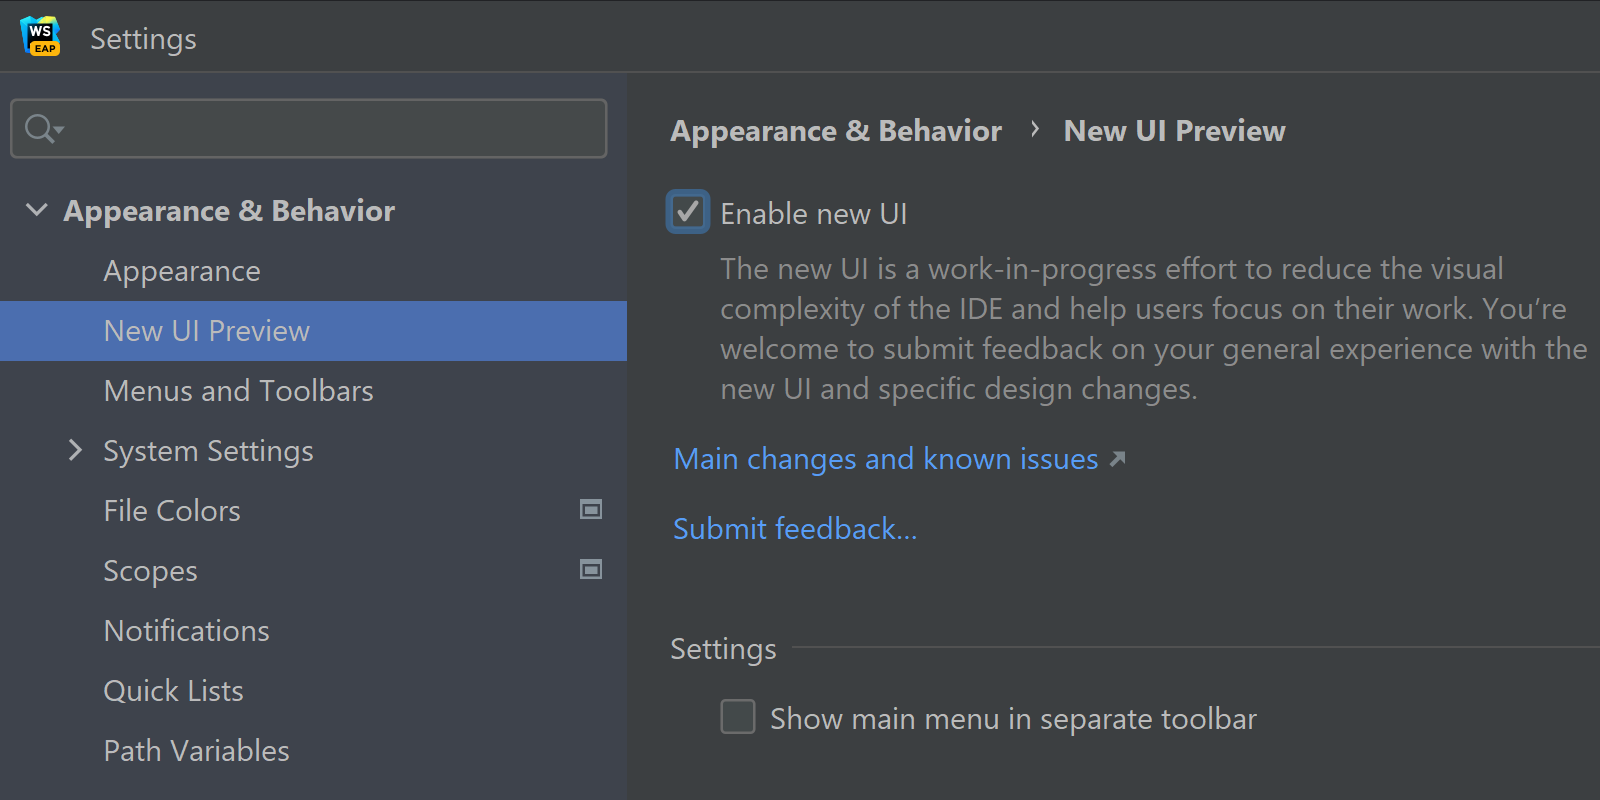 Settings to show how to enable the new UI